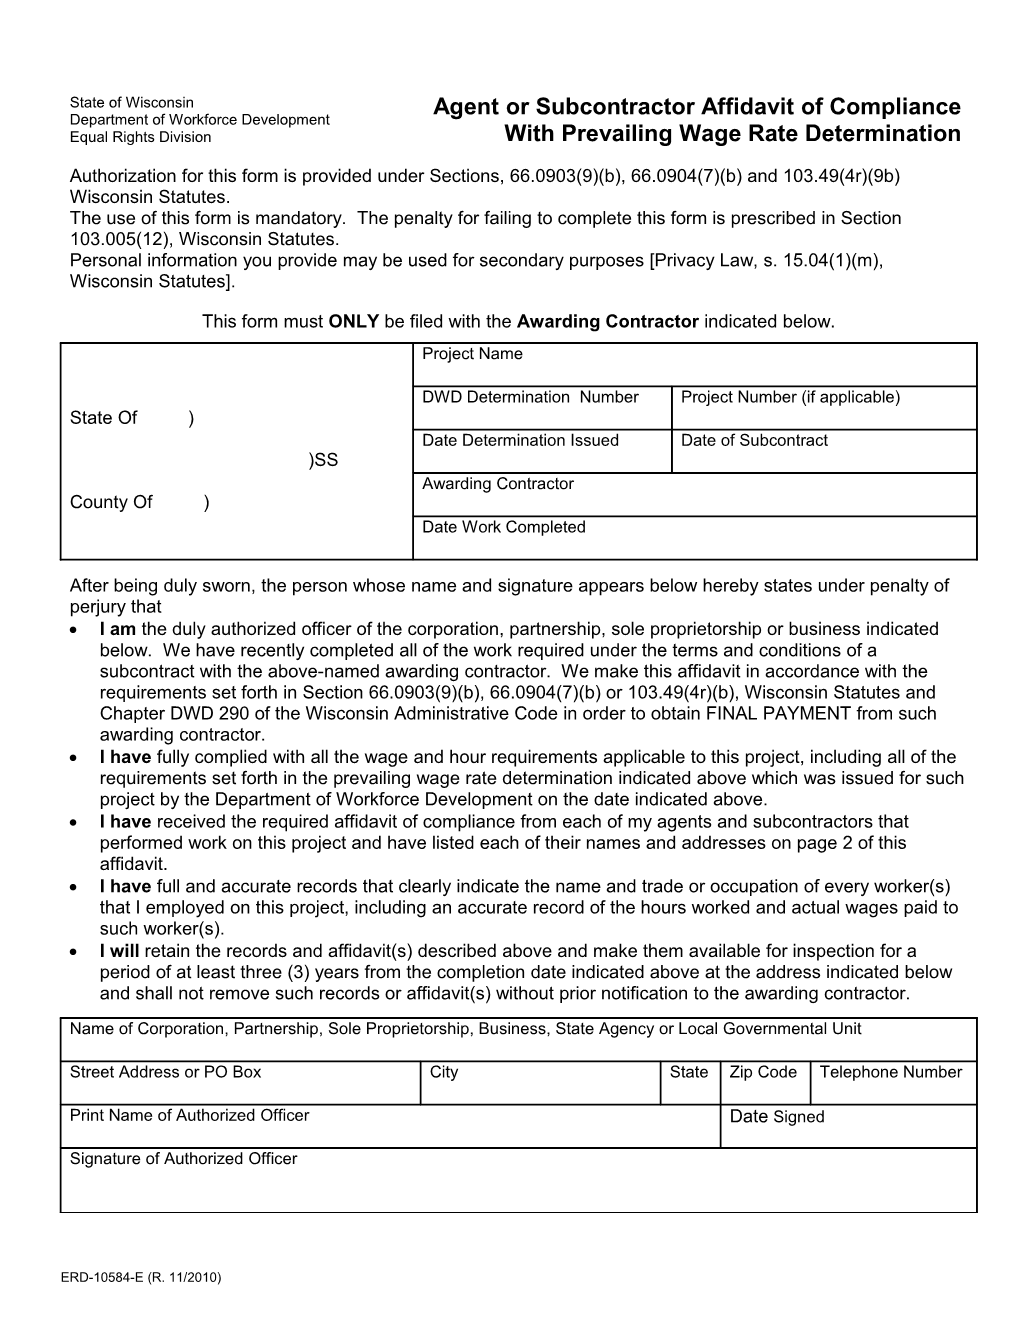 ERD-10584-E, Agent Or Subcontractor Affidavit of Compliance with Prevailing Wage Rate